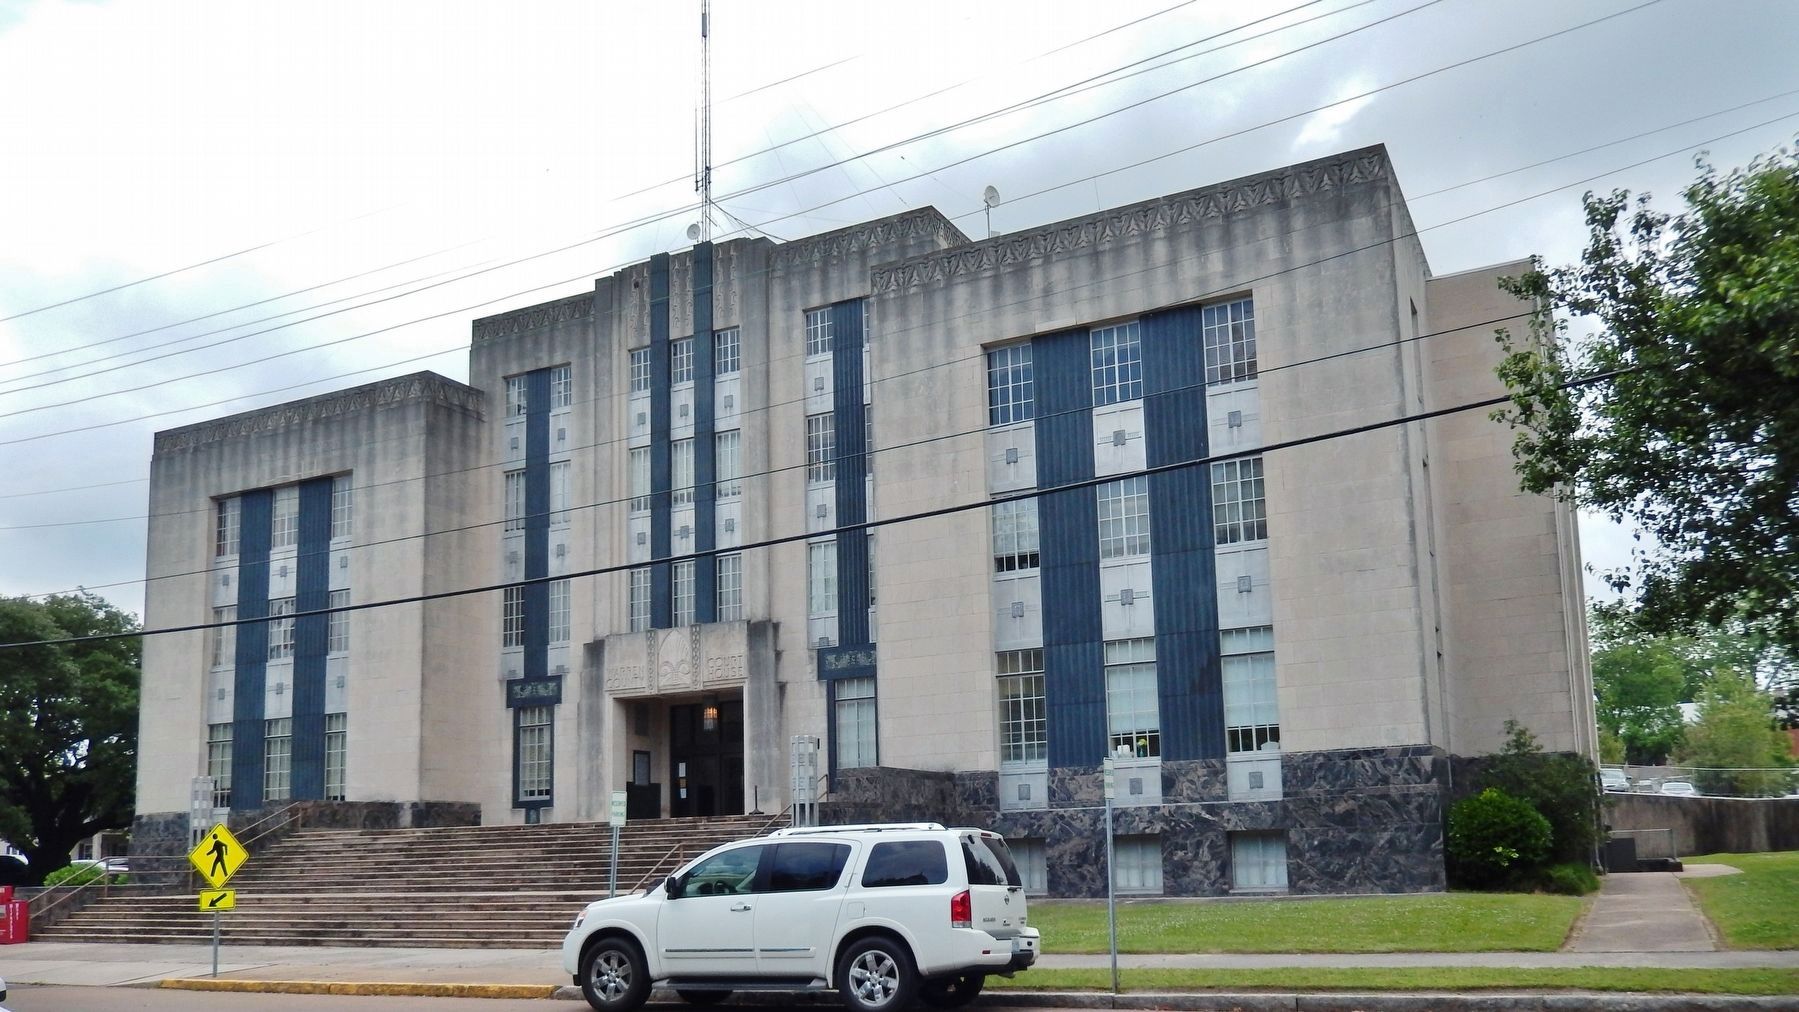 Warren County Court House (<i>west elevation</i>) image. Click for full size.